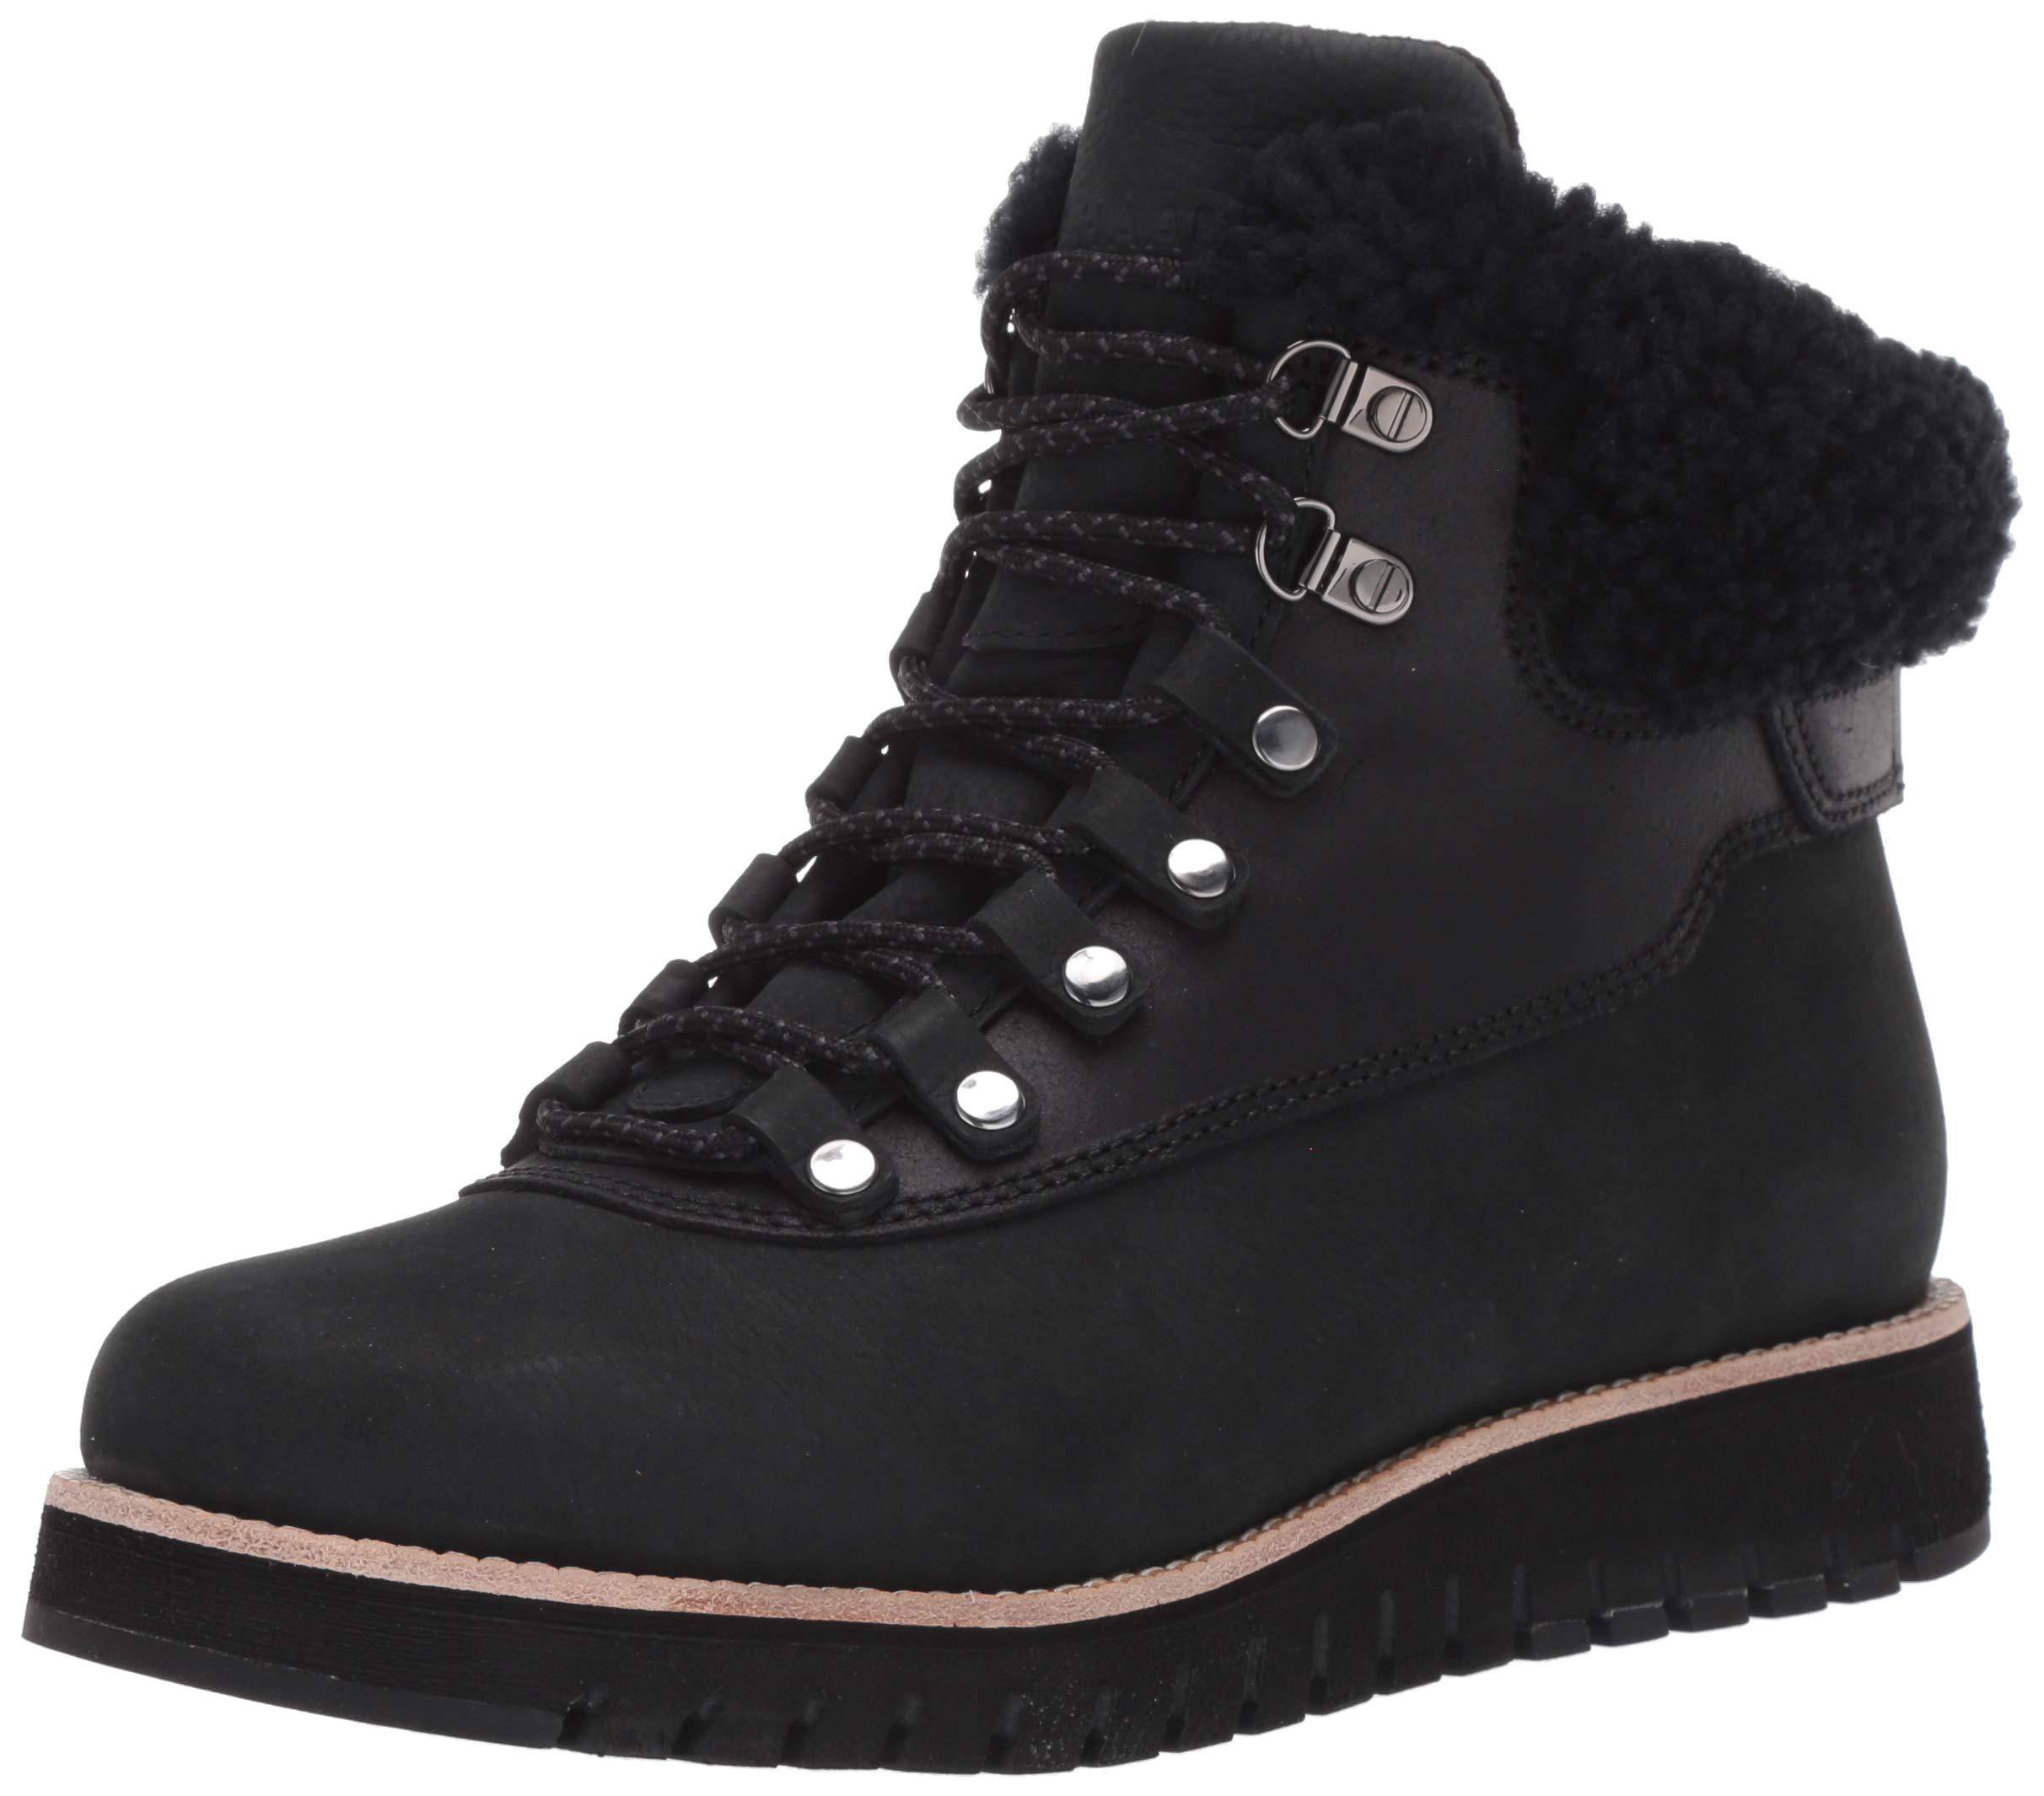 Cole Haan Zerogrand XC W15275 Womens Black Suede Lace Up Hiking Boots 